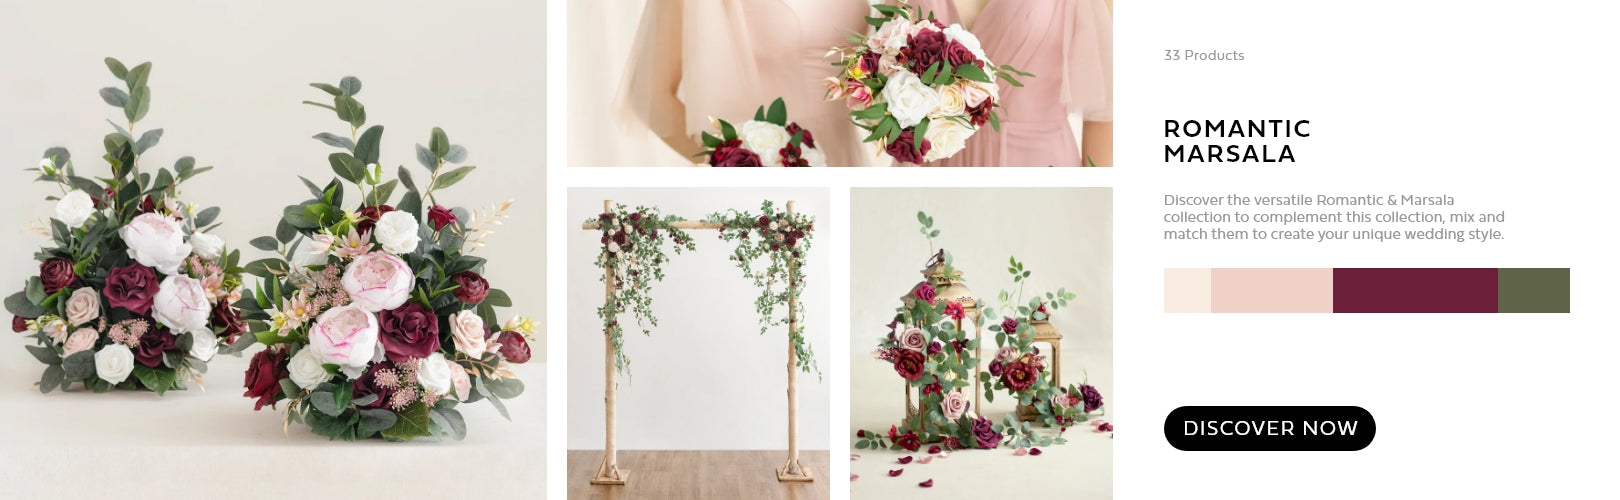 Burgundy and Dusty Rose Wedding related